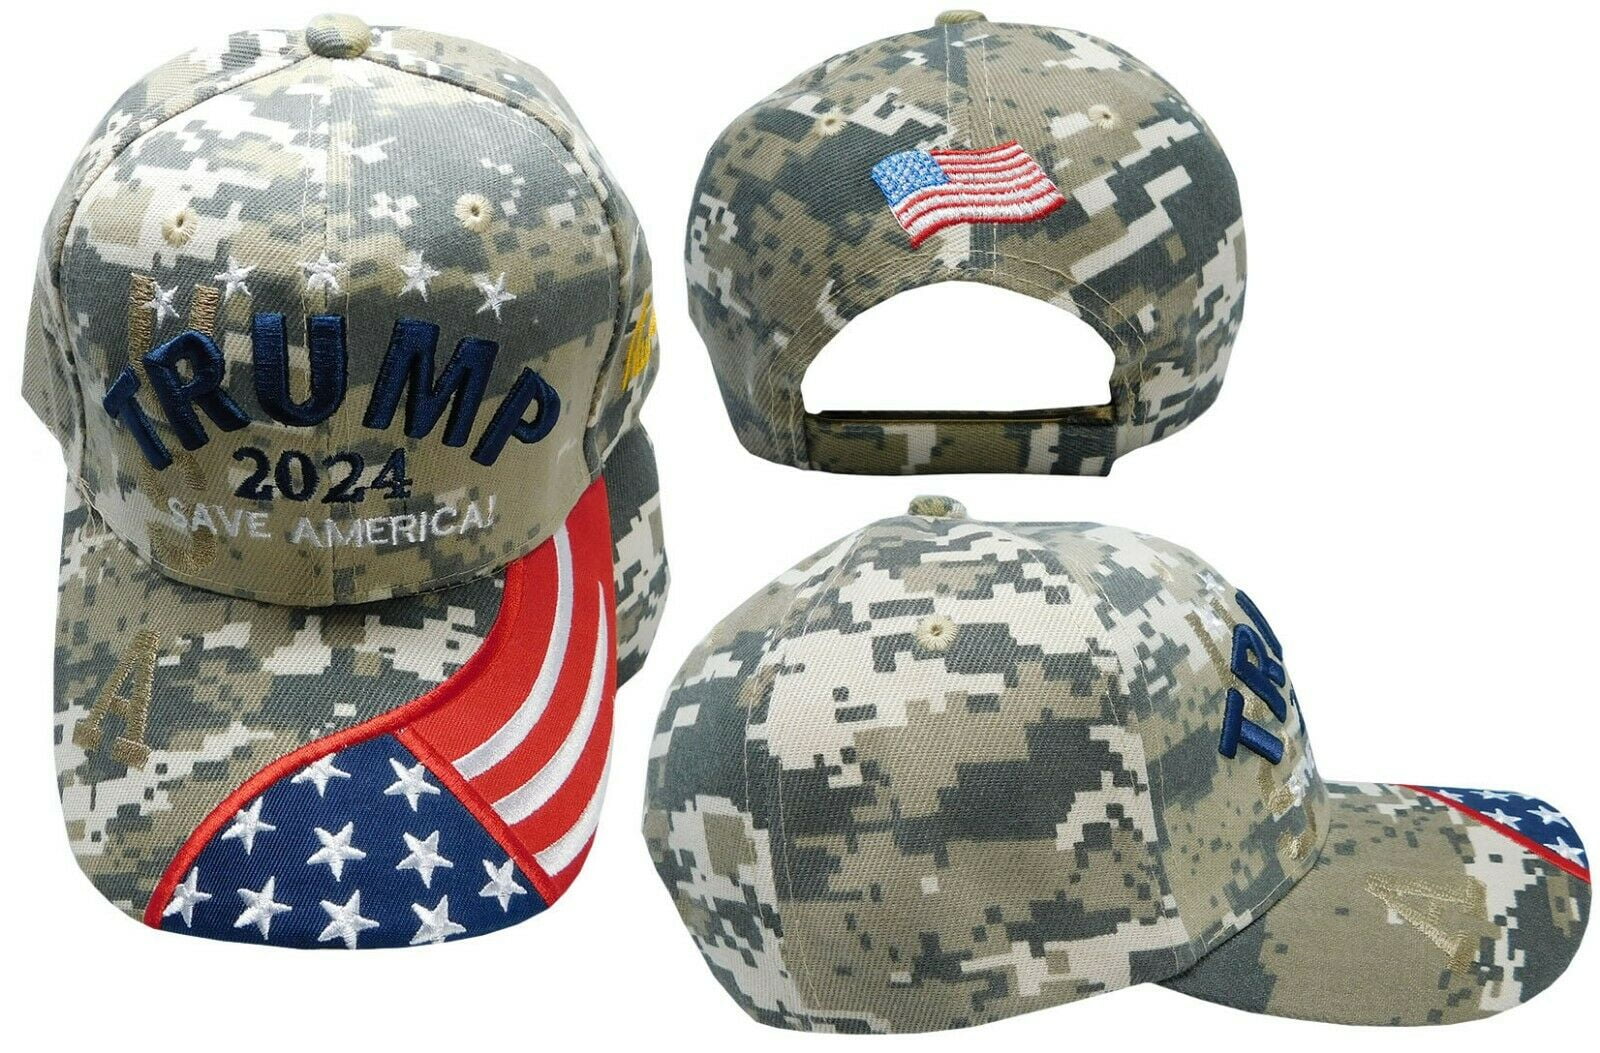 M*A*G*A 2020 Trump Black Camouflage USA Bill 100% Acrylic Embroidered Hat Cap 